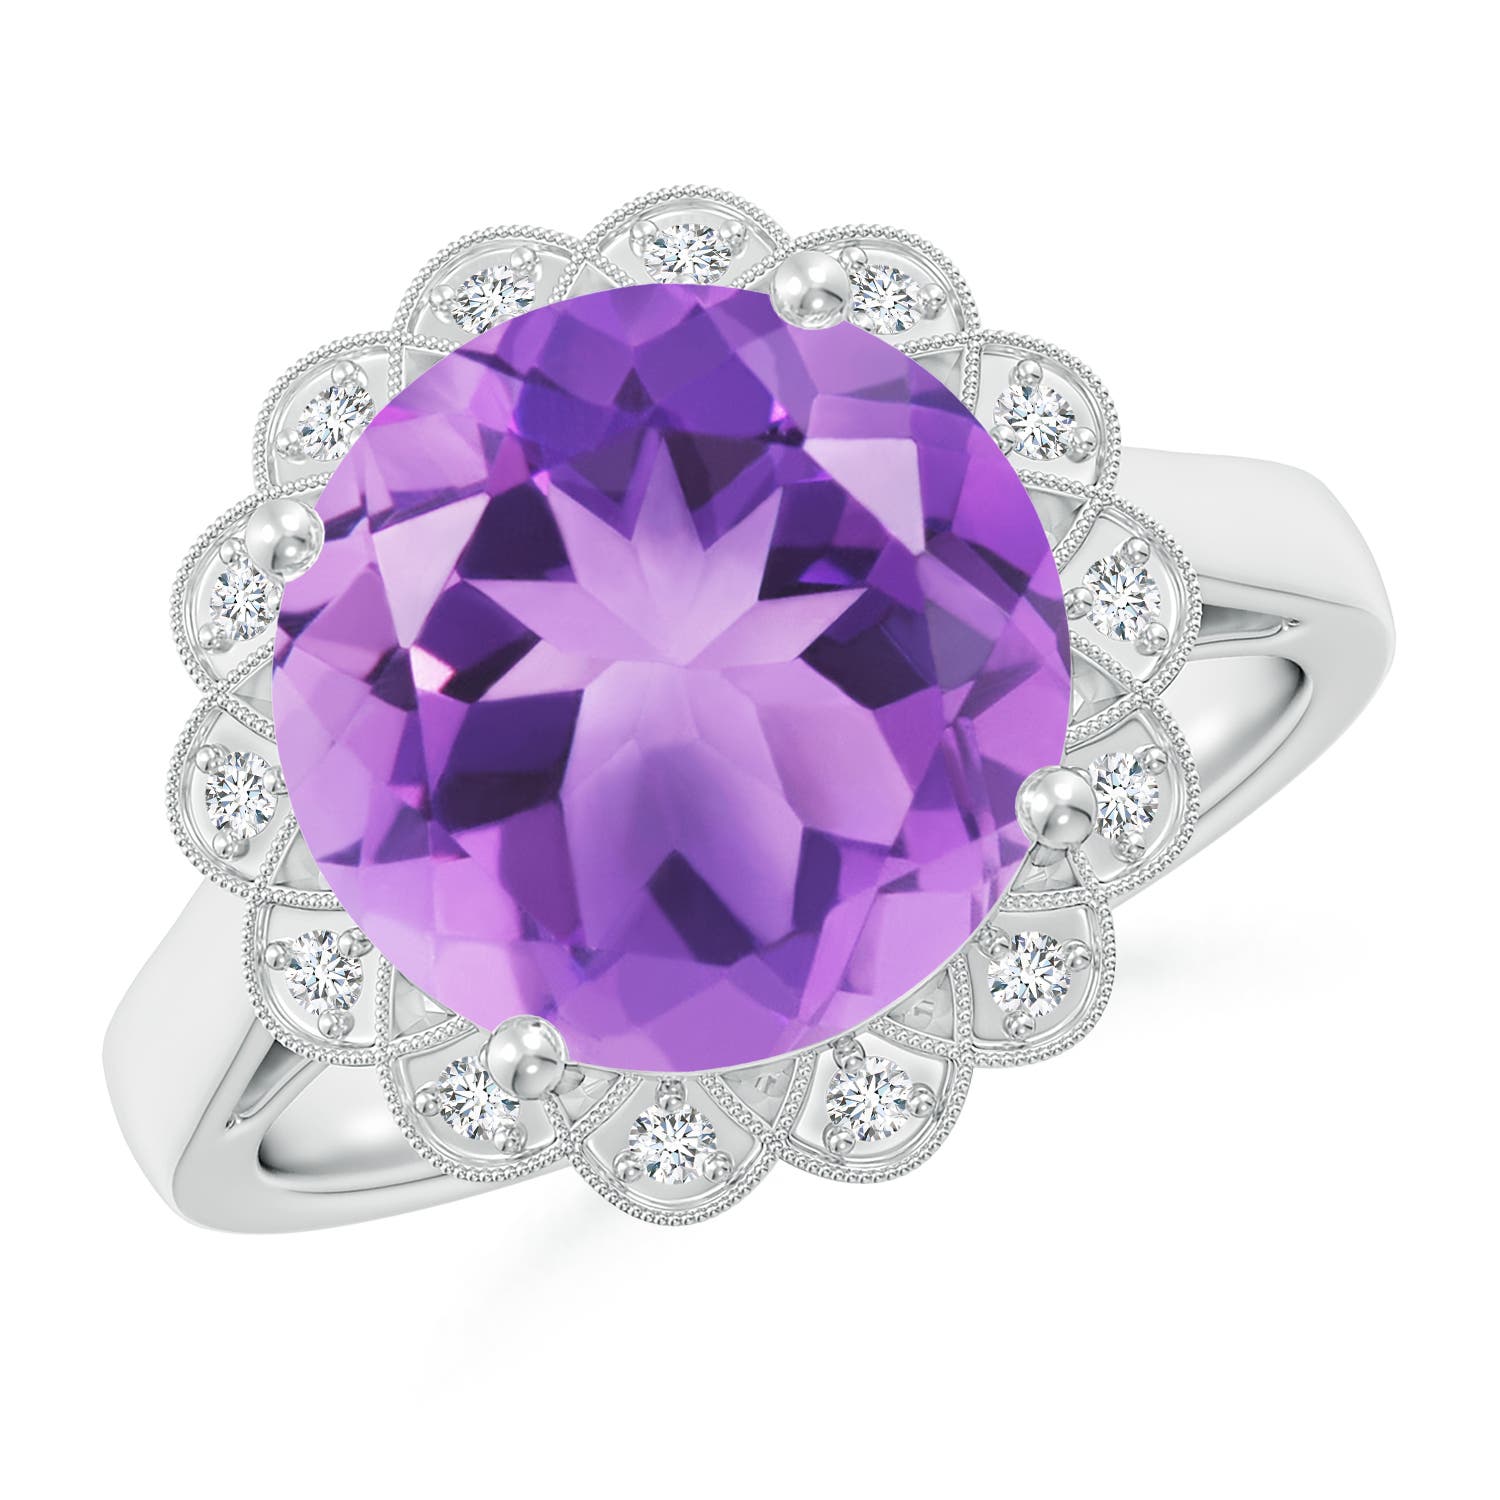 A- Amethyst / 4.86 CT / 14 KT White Gold